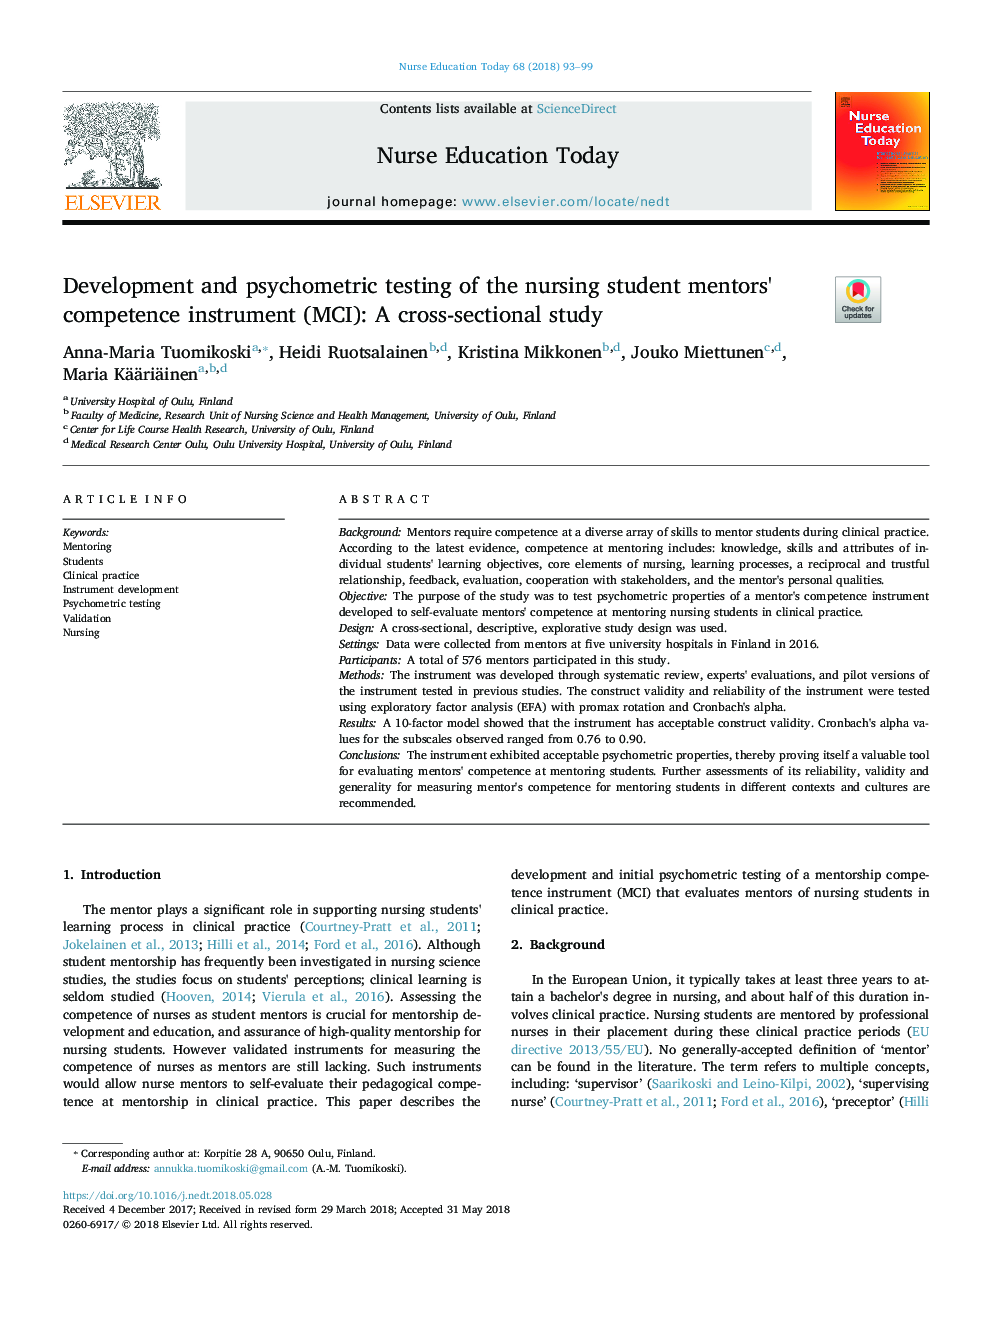 Development and psychometric testing of the nursing student mentors' competence instrument (MCI): A cross-sectional study